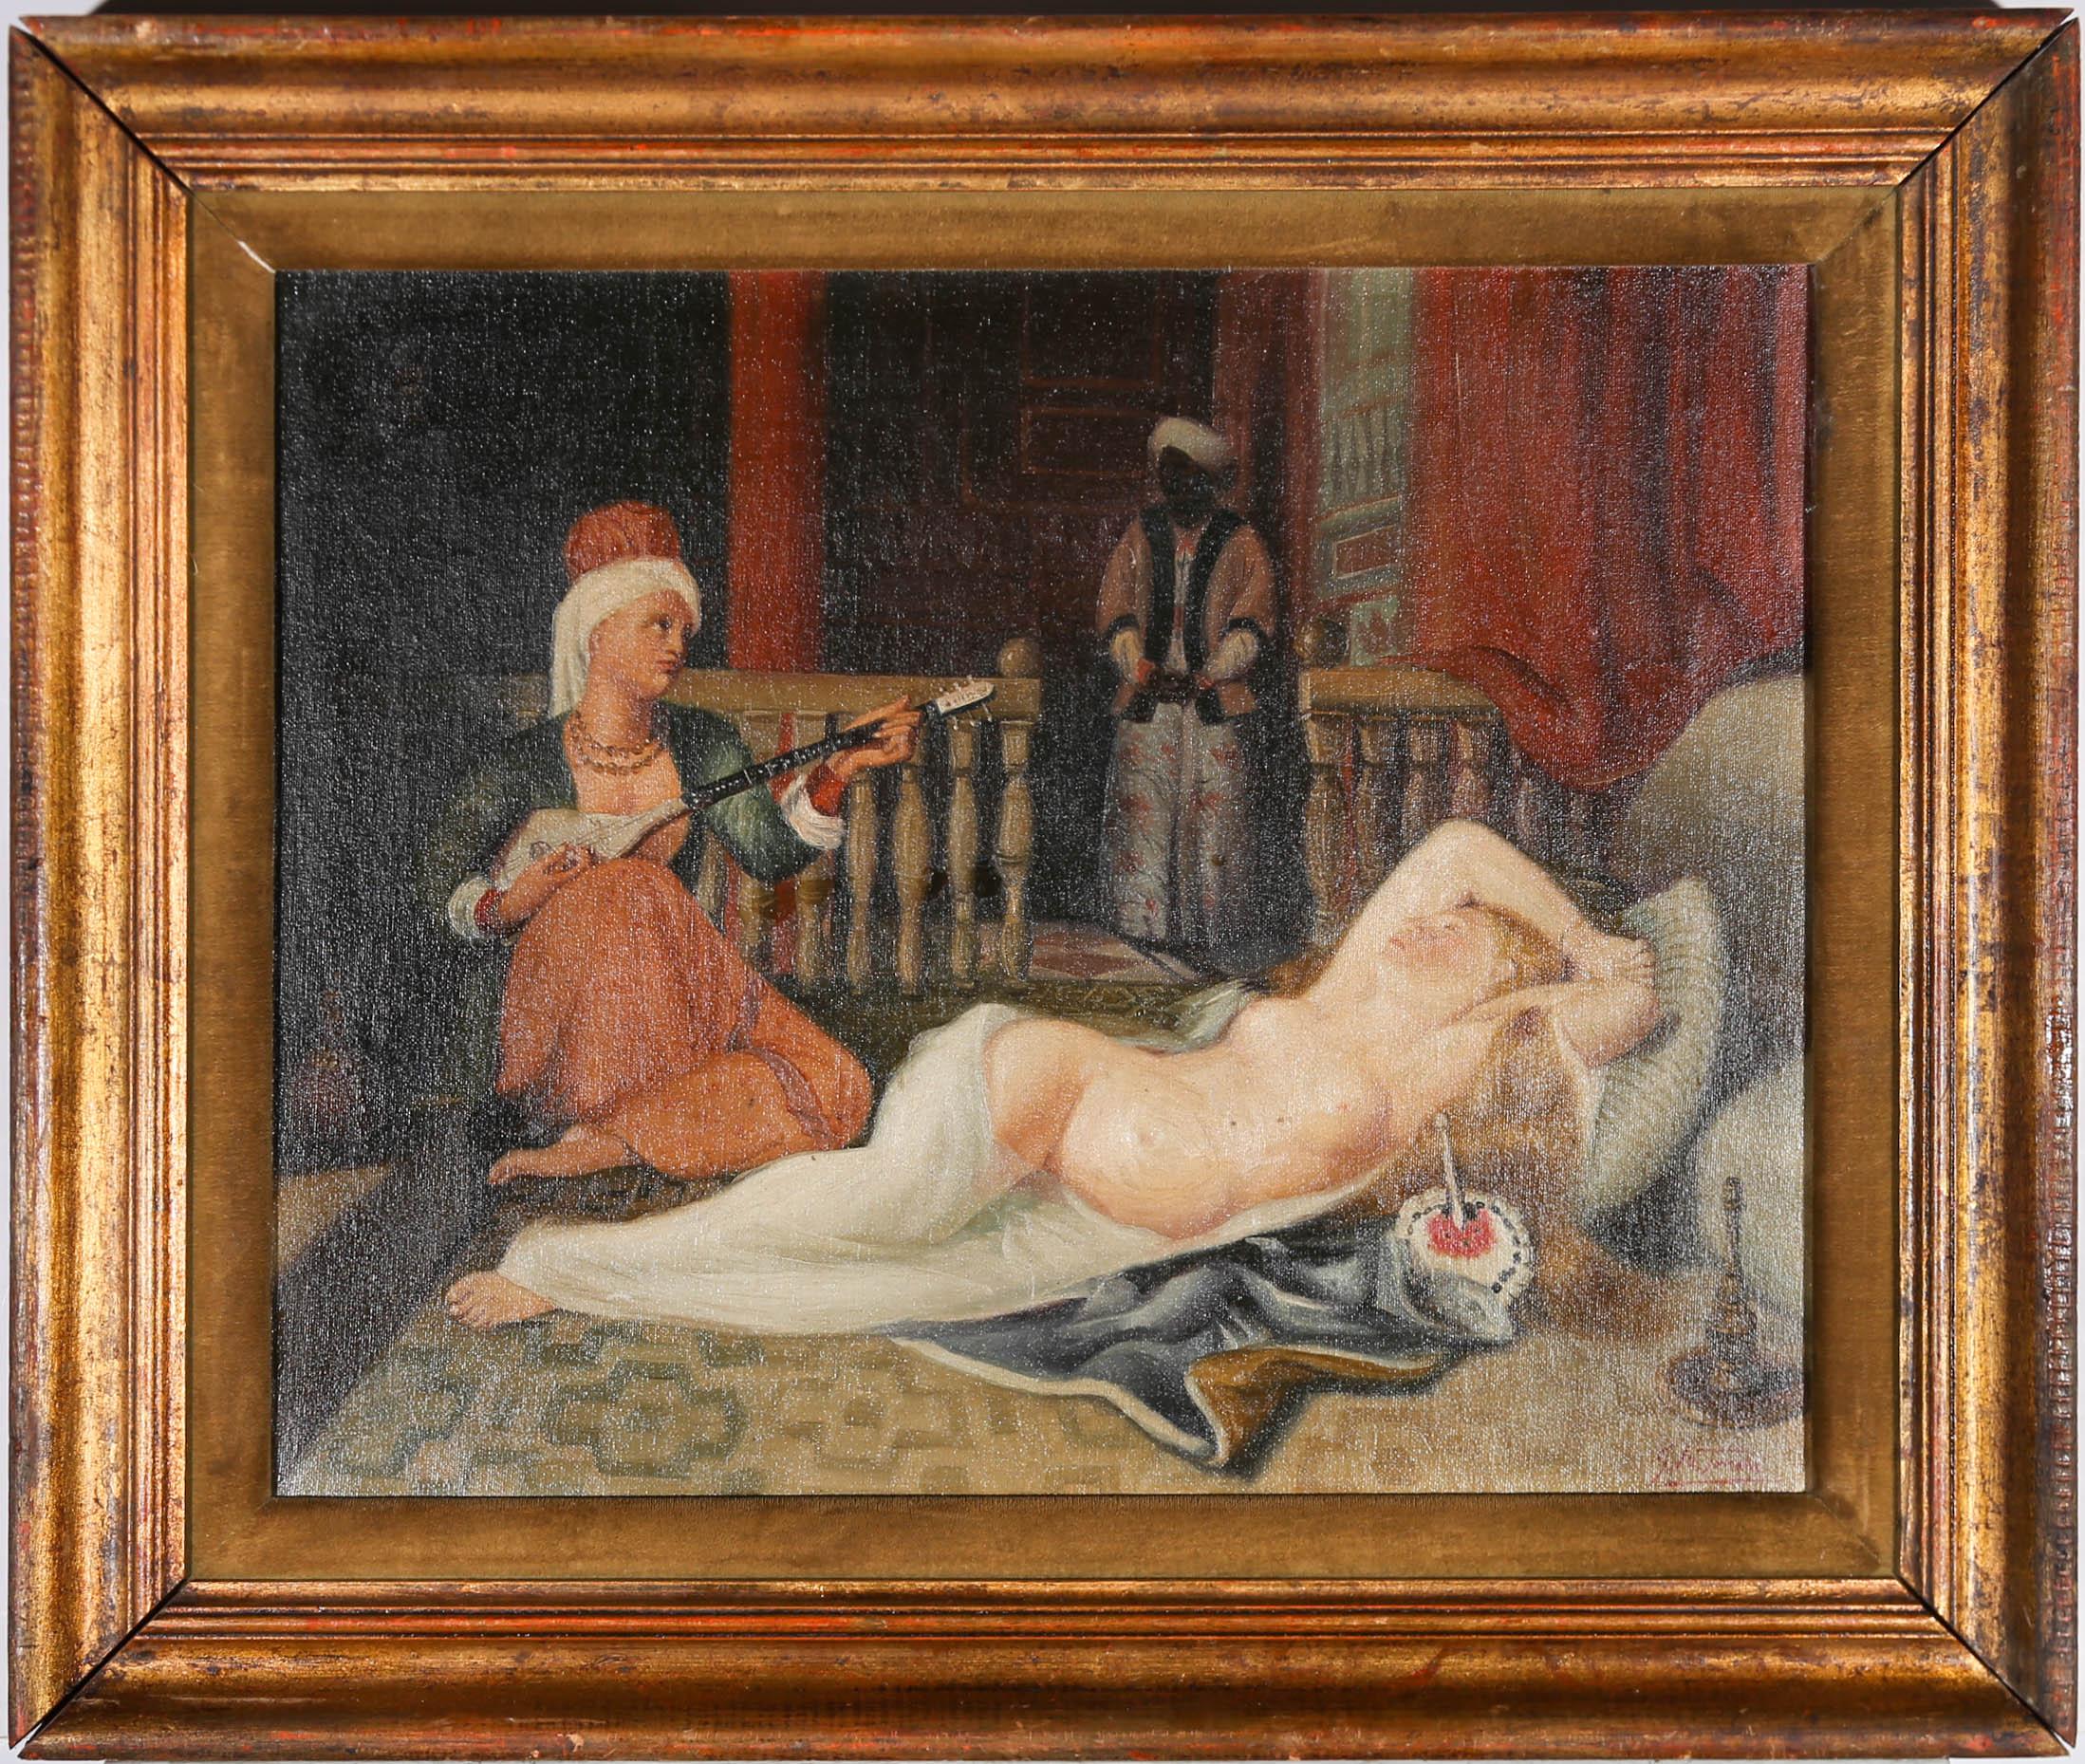 A fine study of Ingres' Odalisque which was originally painted in 1839 under the commission of Charles Marcotte. The painting depicts a reclining female nude who is entertained by two servants. The original has been widely studied by scholars for